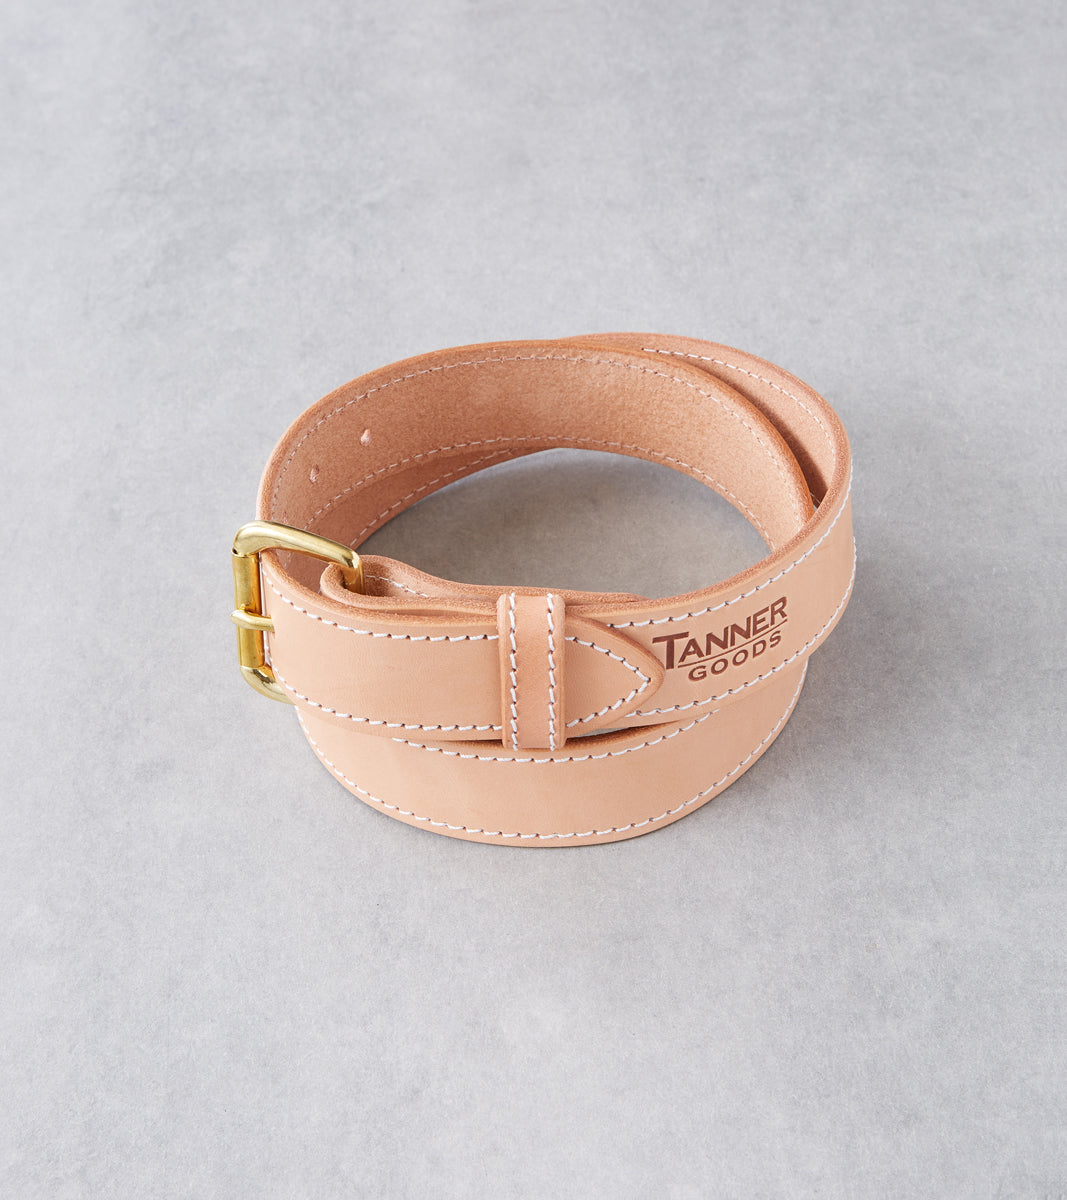 Grease leather belt nature, Brown